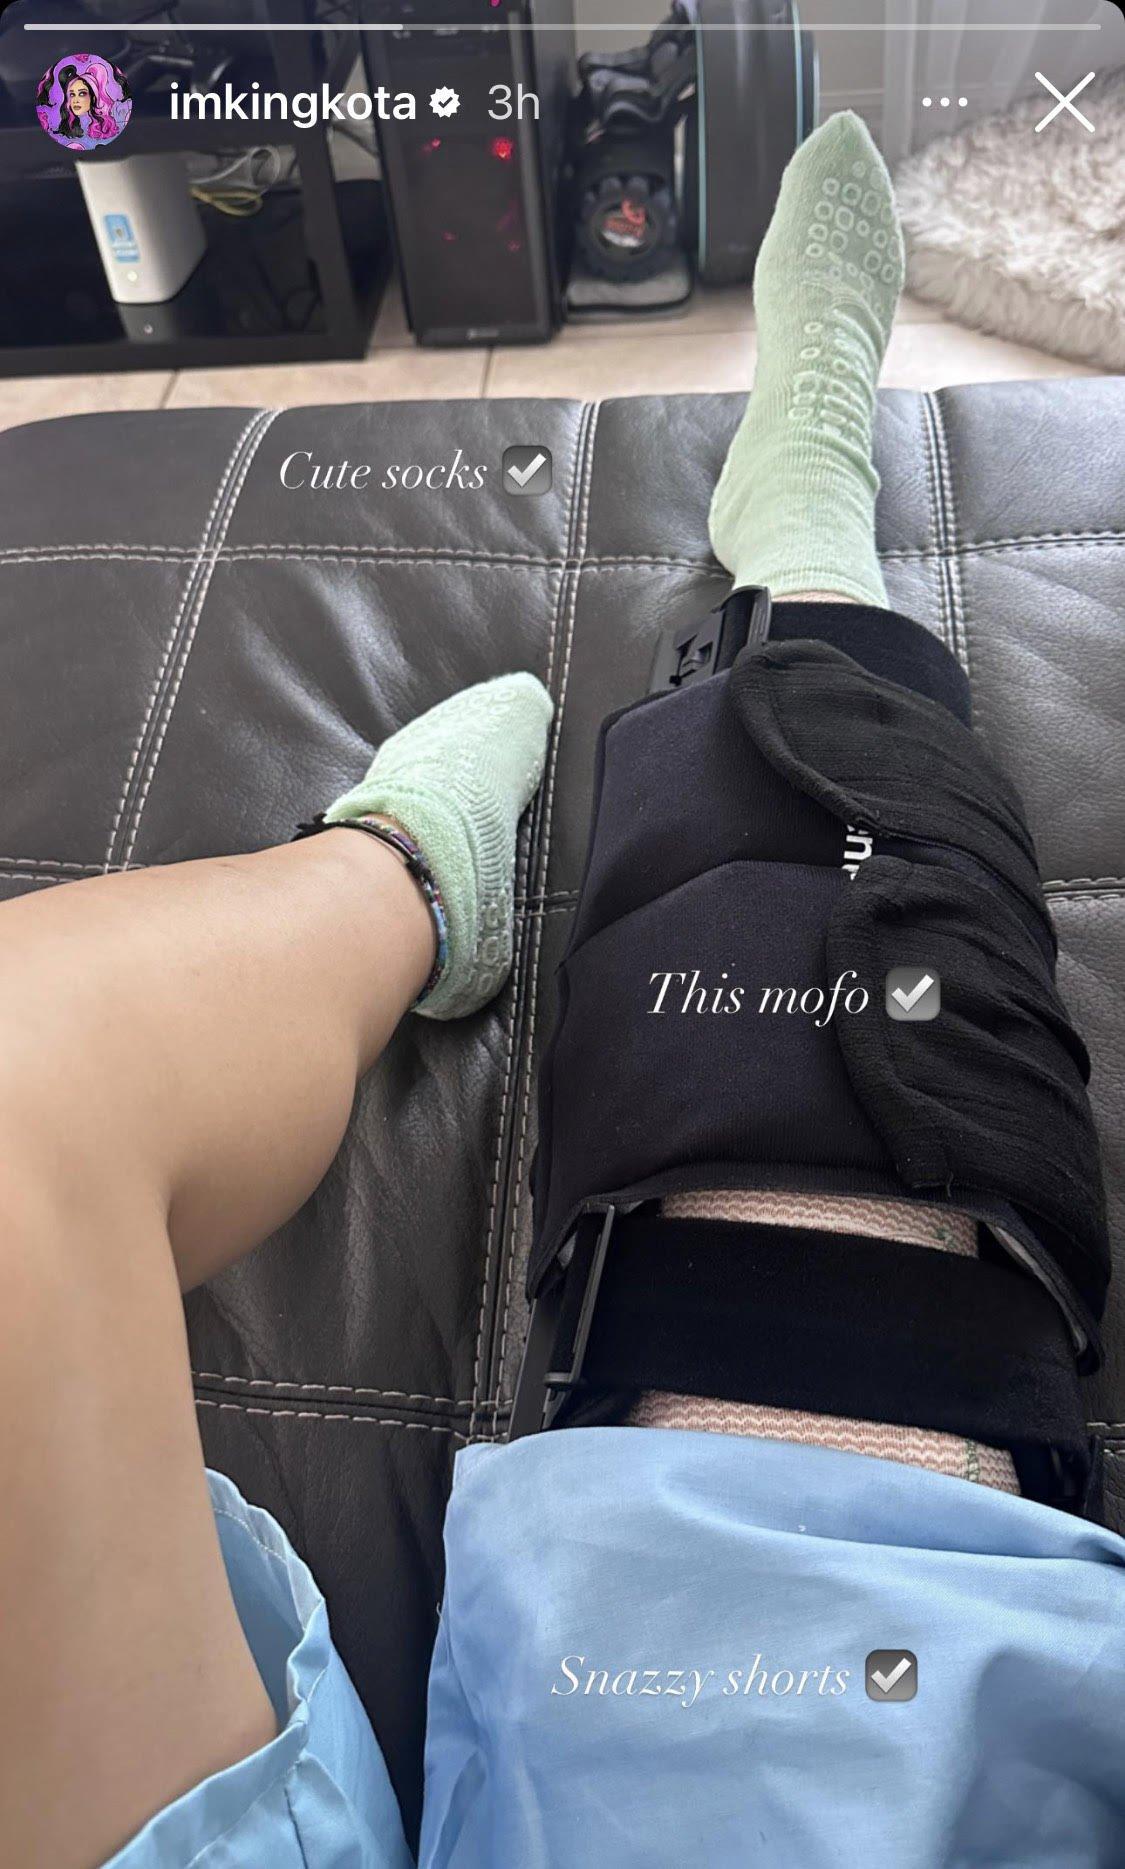 Dakota shared a photo to her Instagram Story of her knee post-ACL surgery on May 23, 2023.